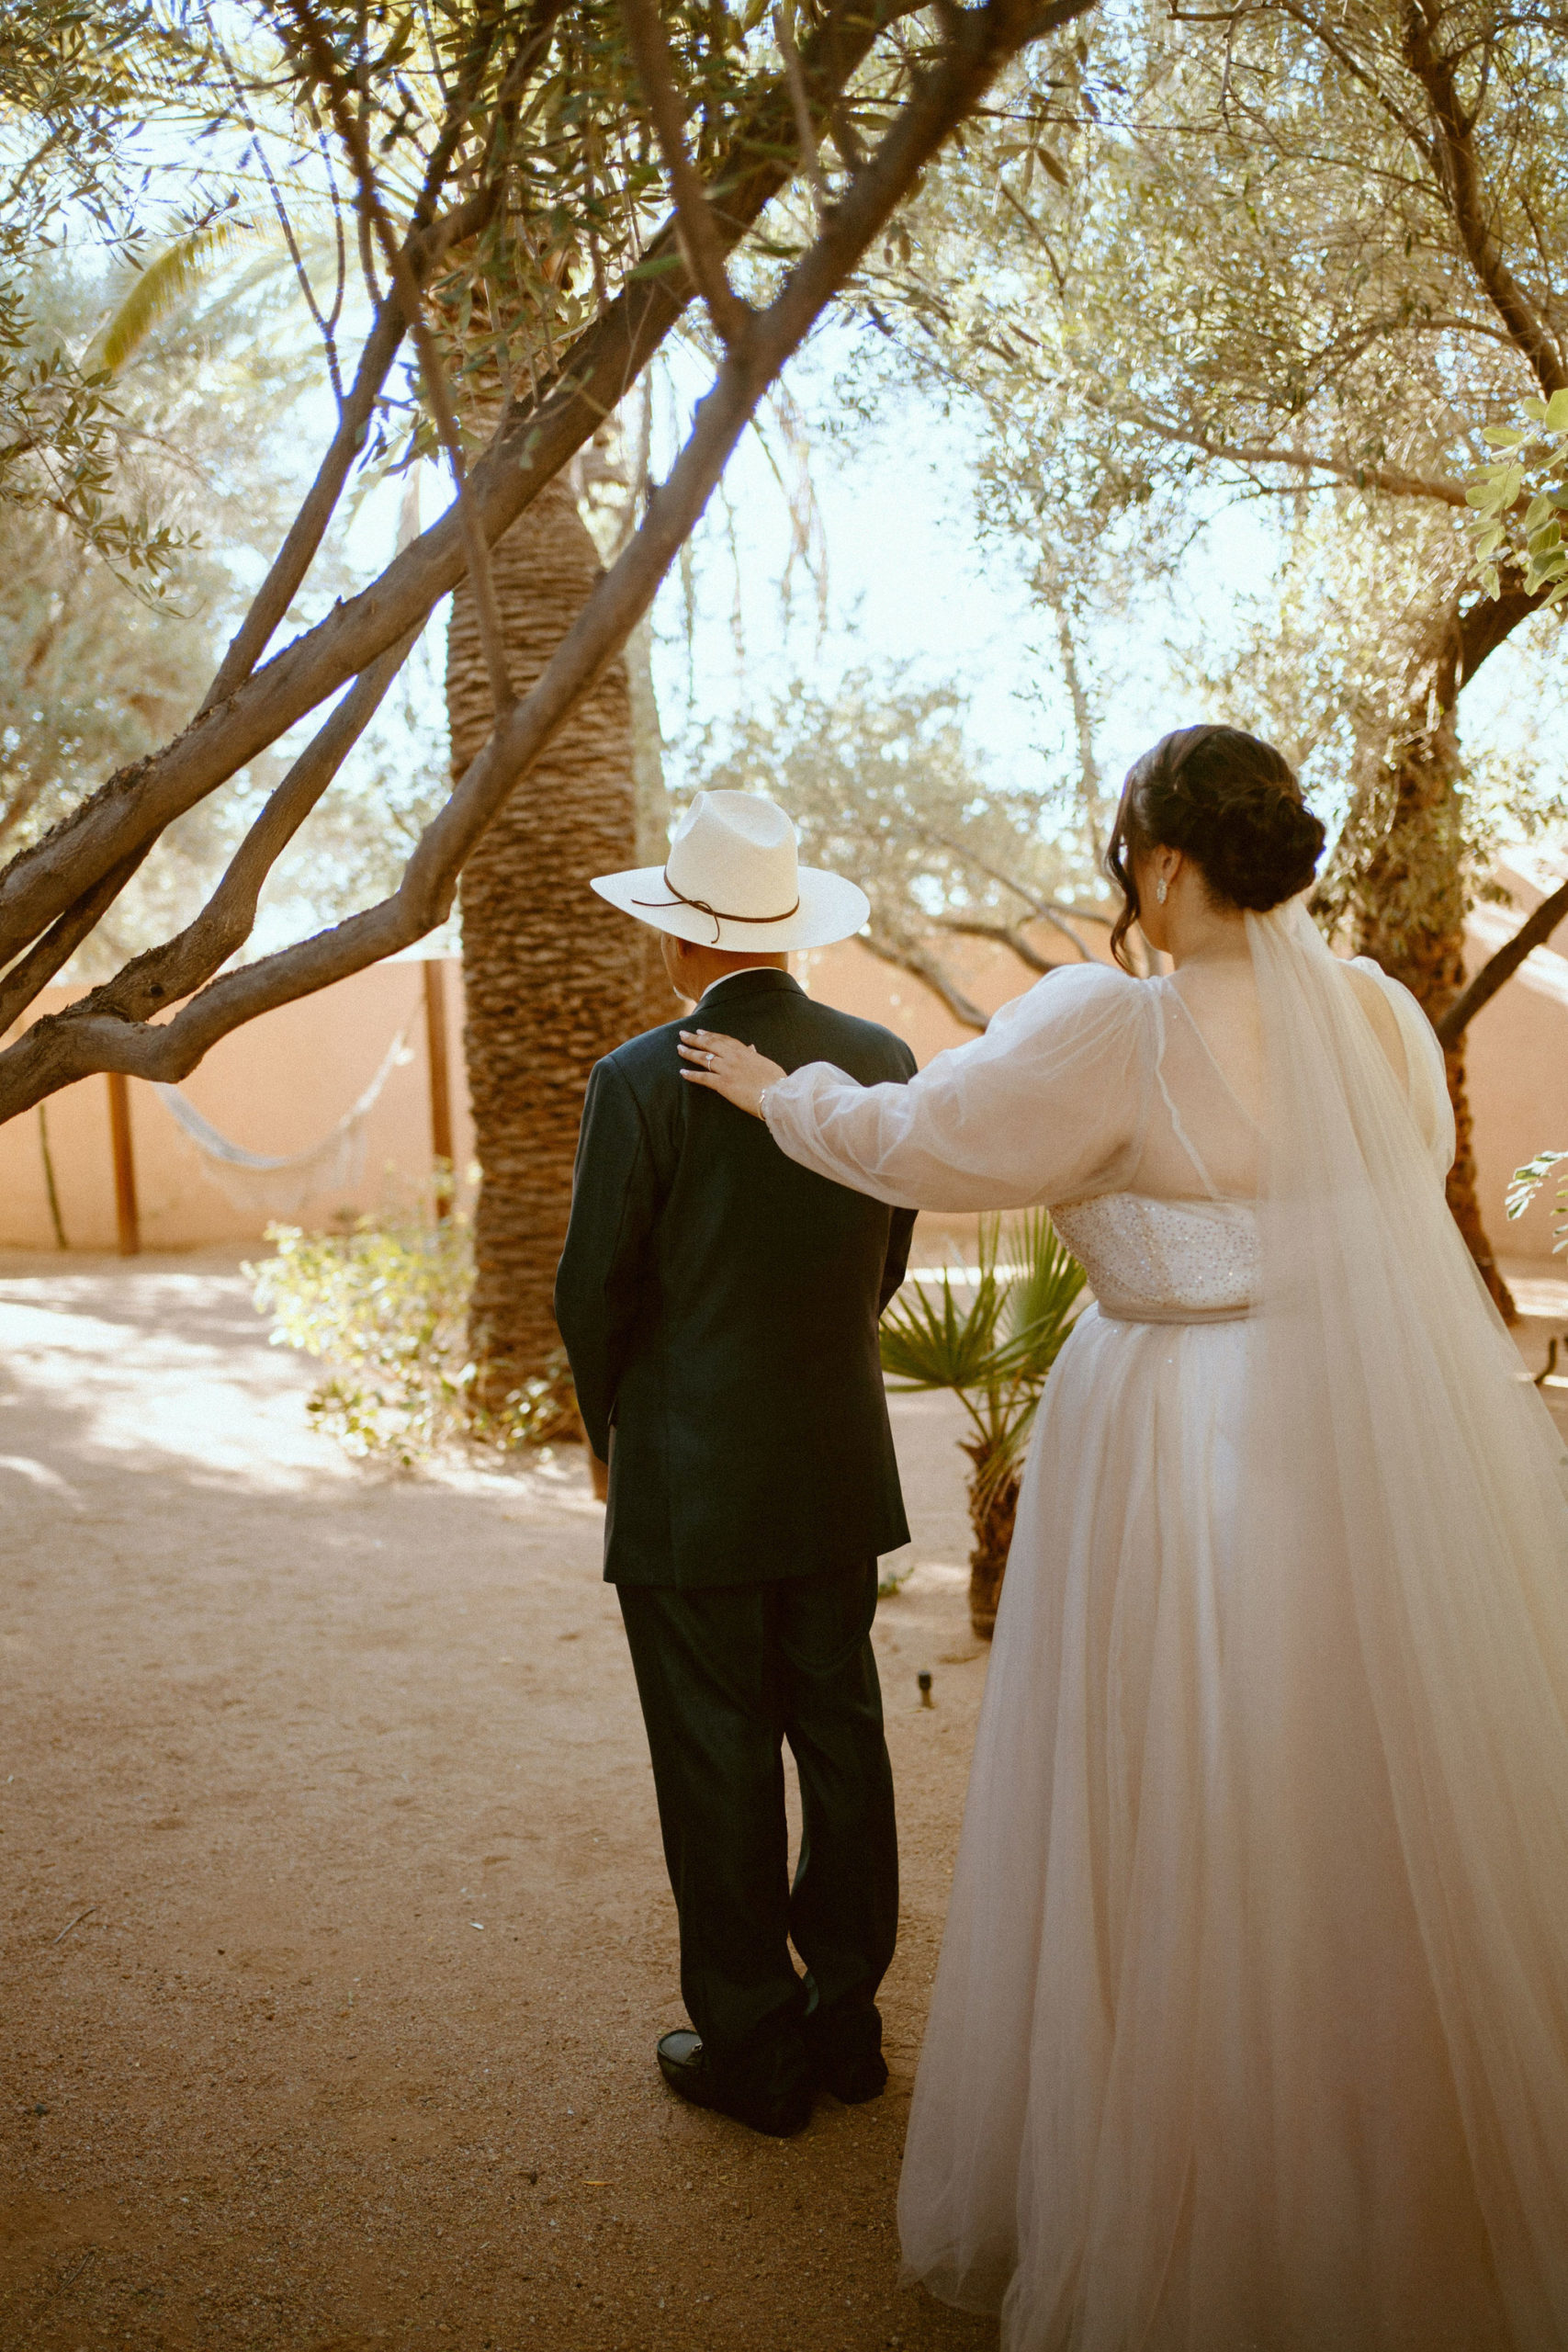 Saguaro National Park Micro-Wedding. The bride tapping on her dads shoulder for the first look